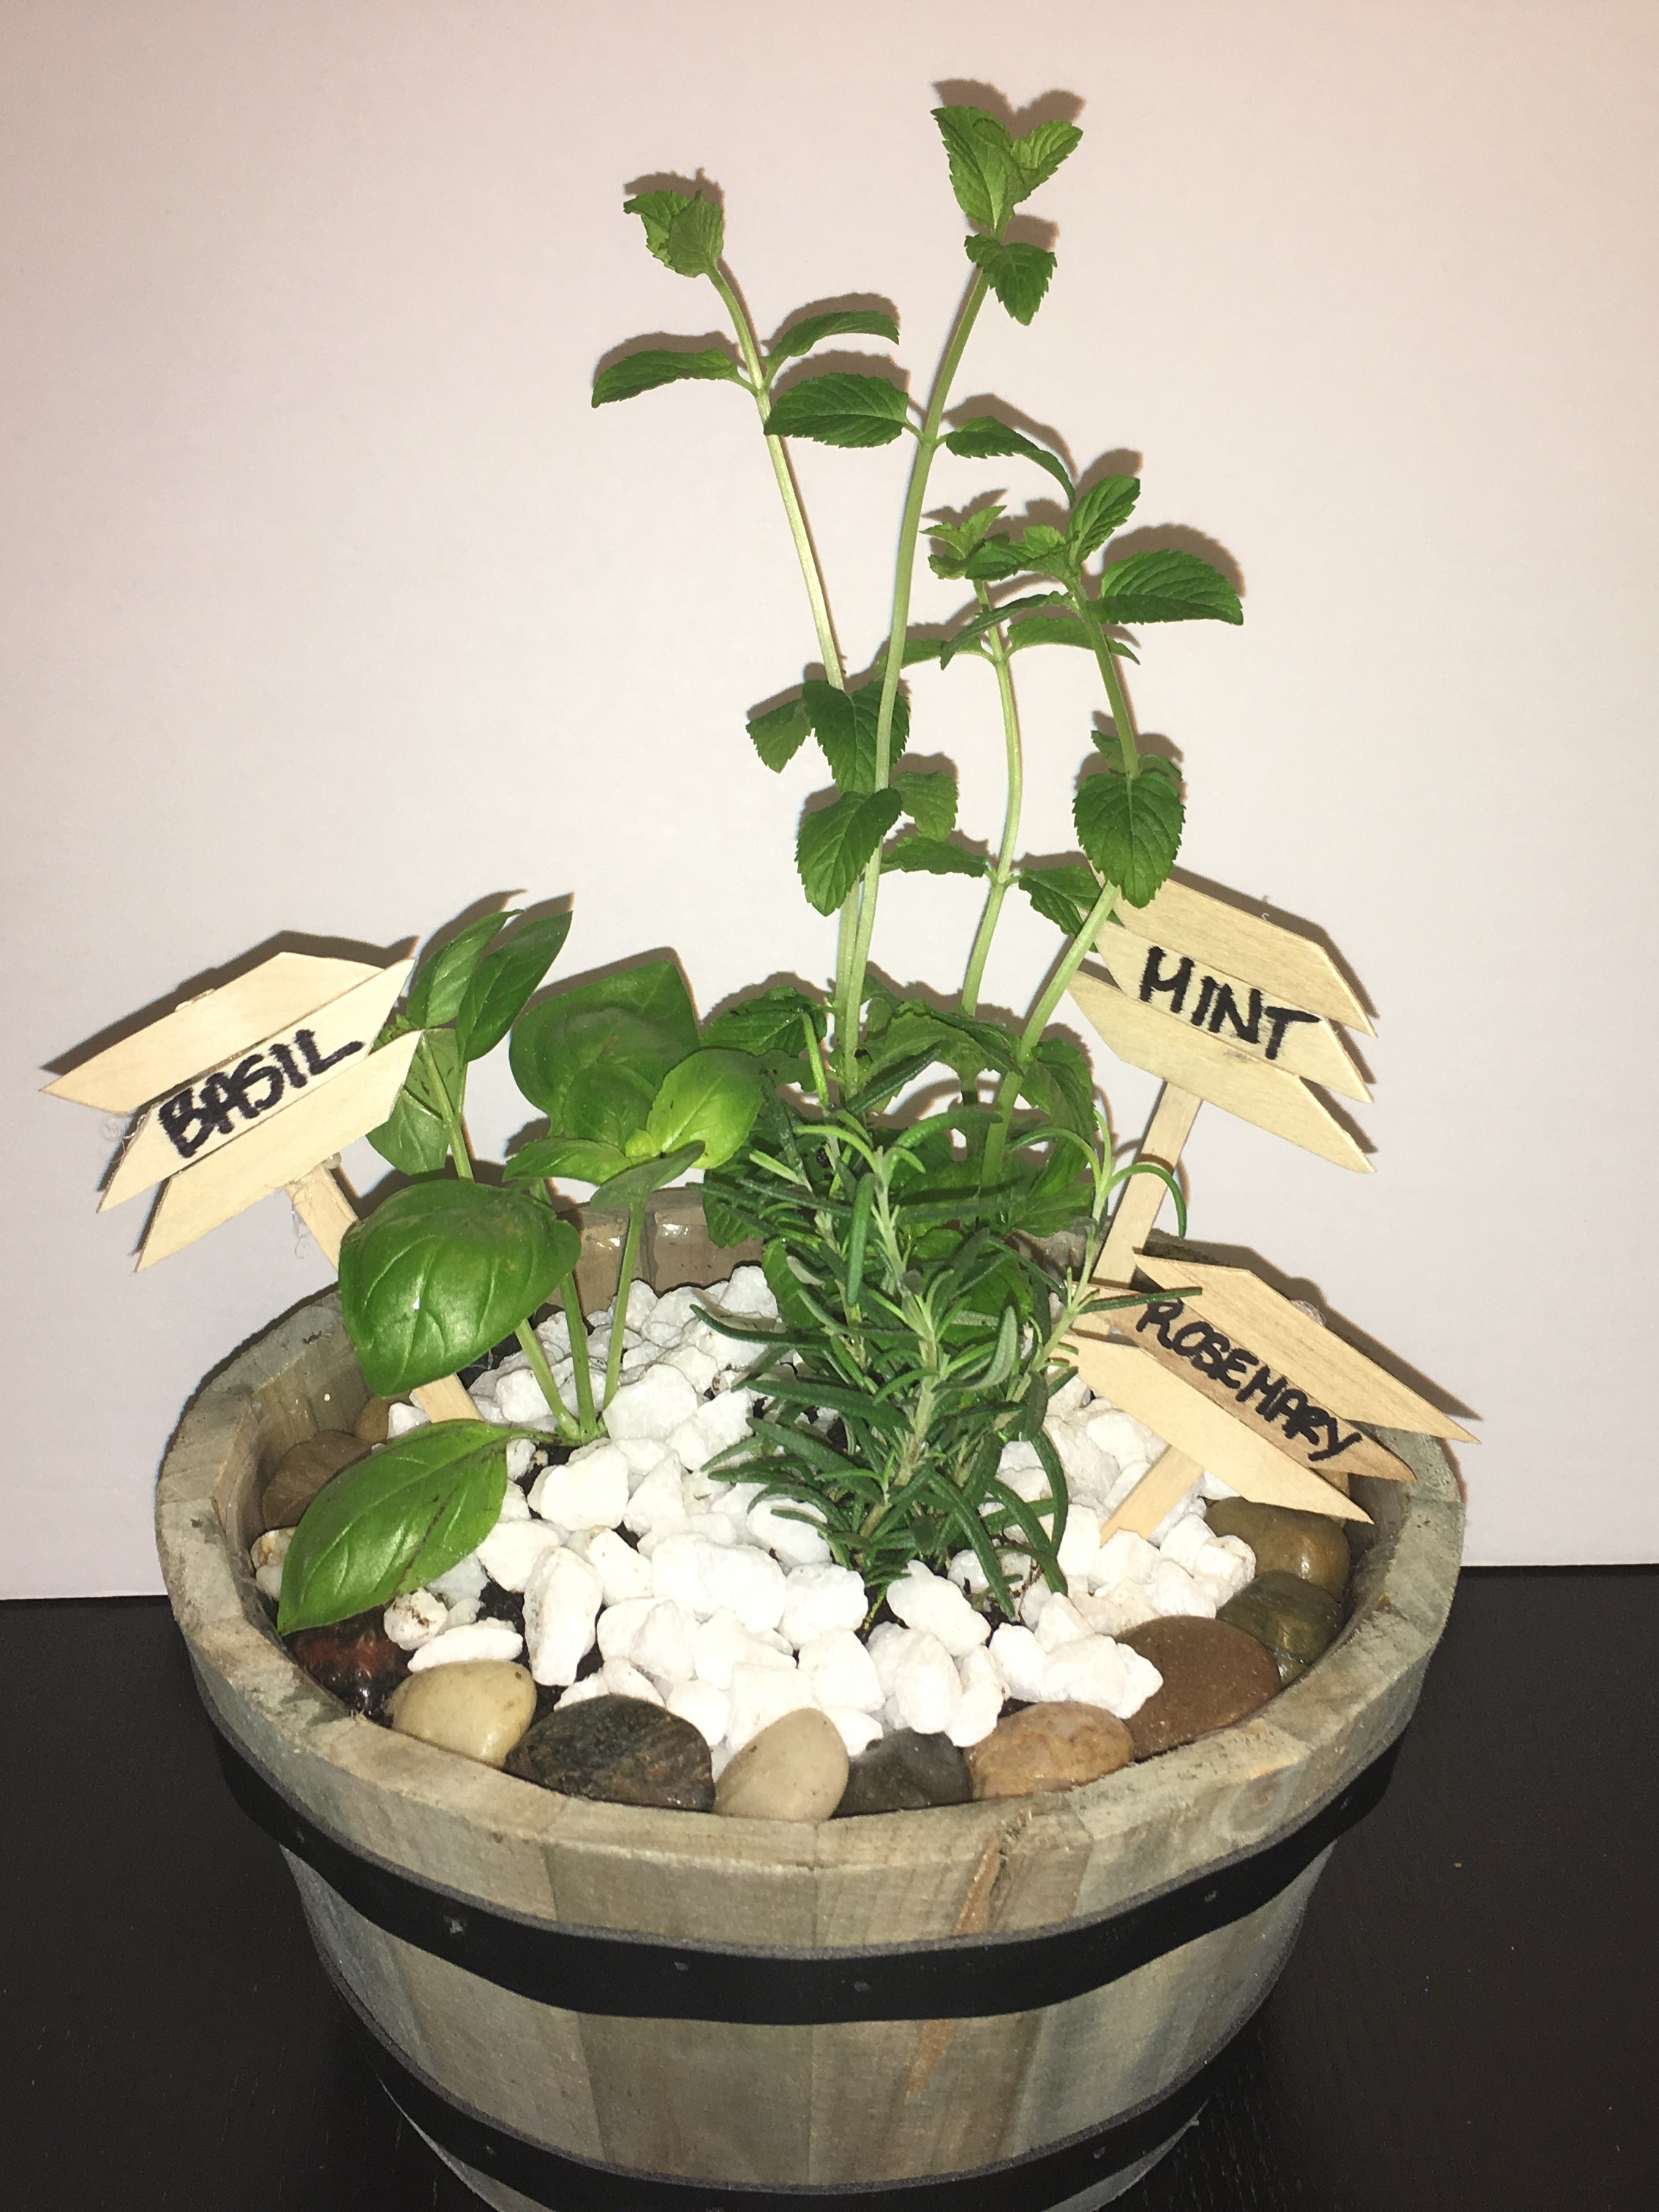 A Barrel Herb Garden plant nite project by Yaymaker